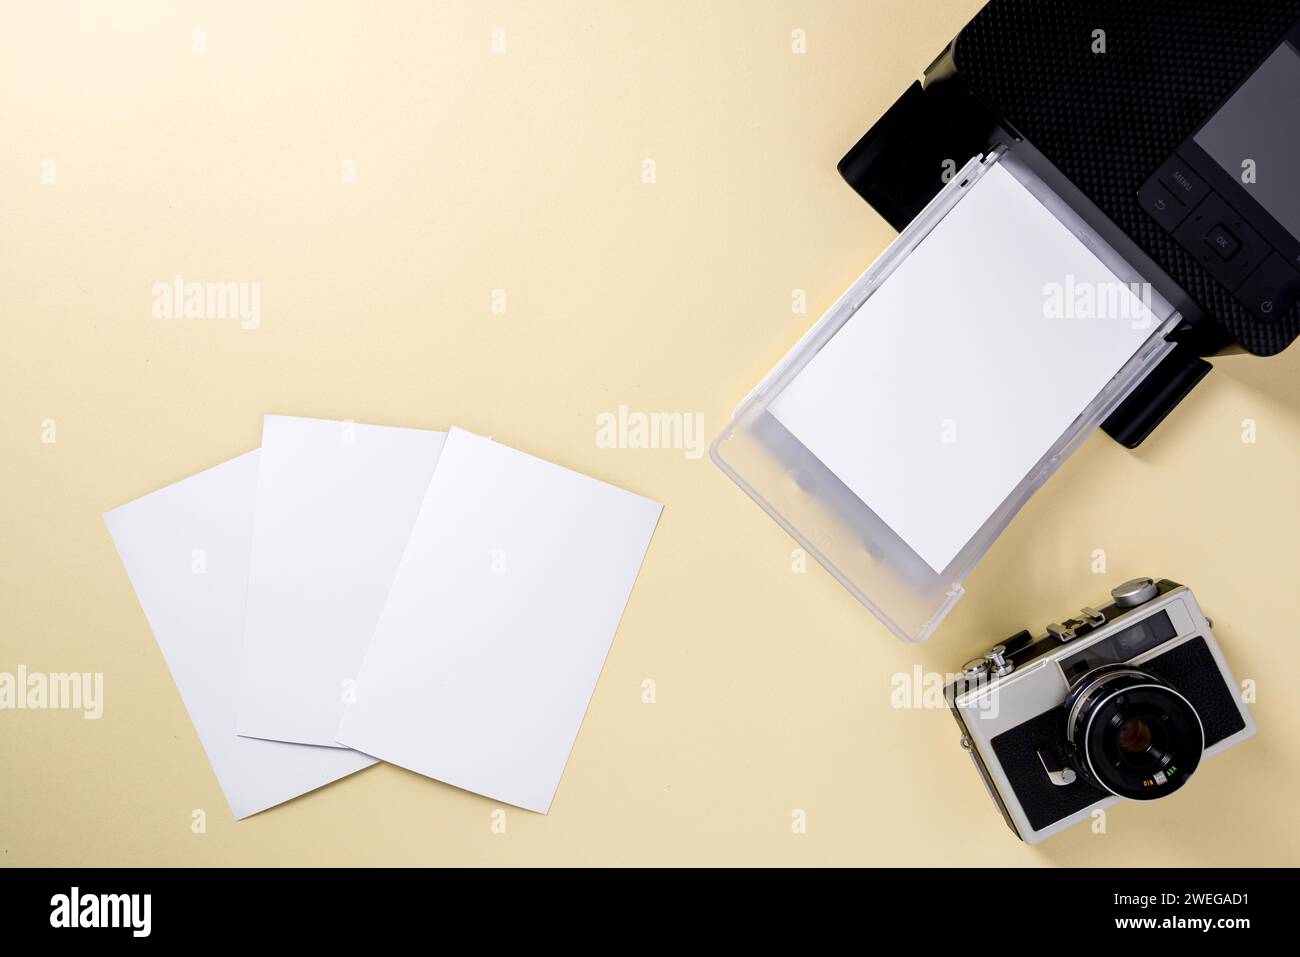 Top view of retro camera, blank photo papers and mobile photo printer Stock Photo